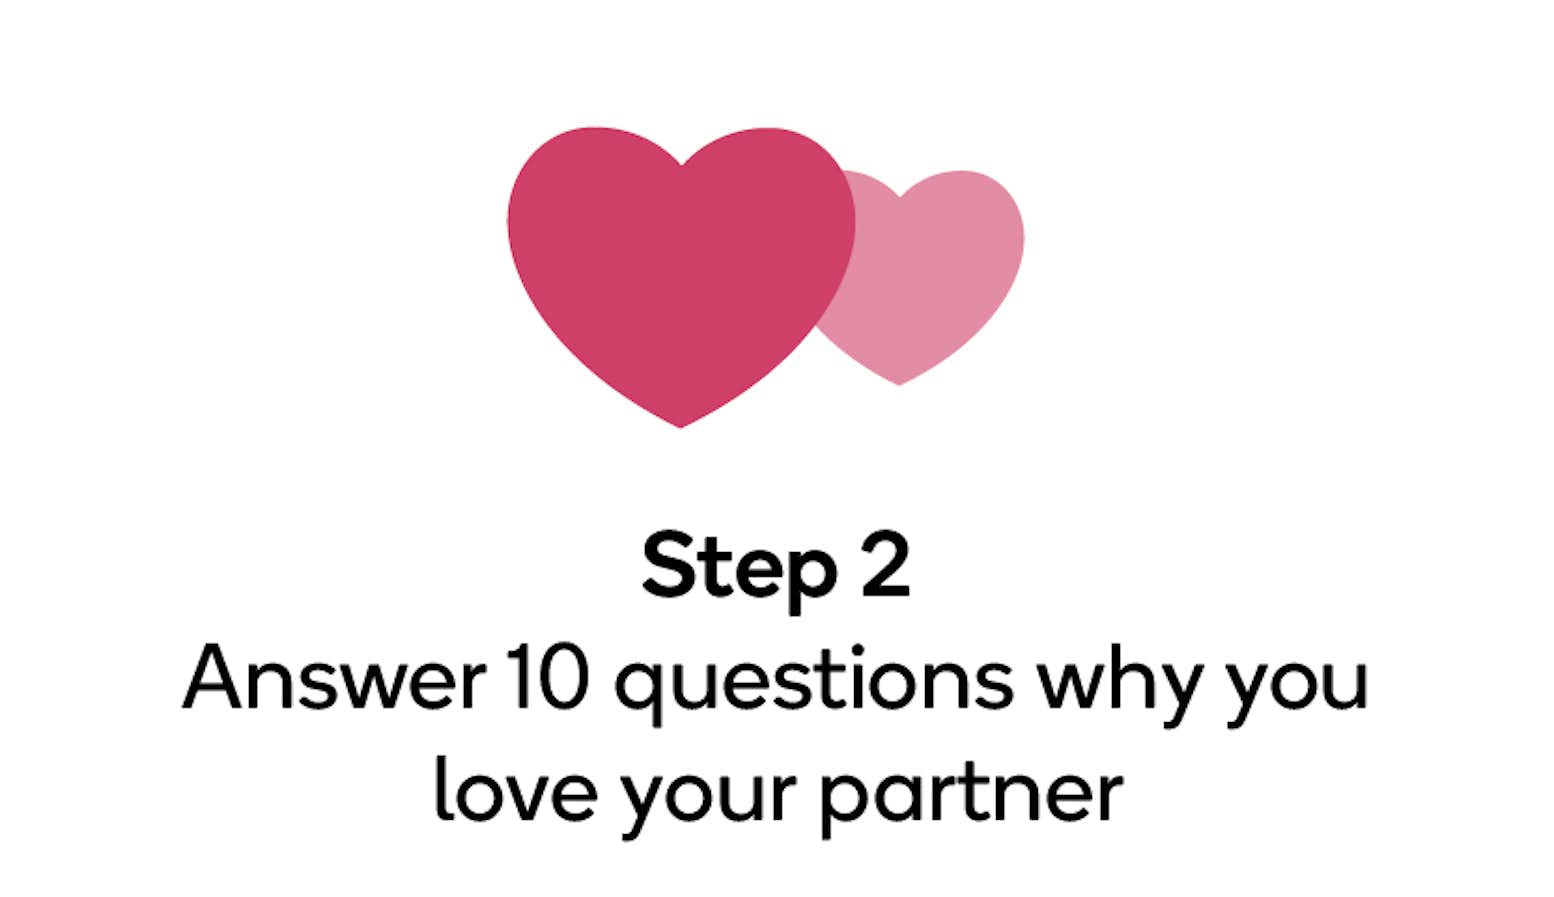 Answer 10 questions why you love your partner